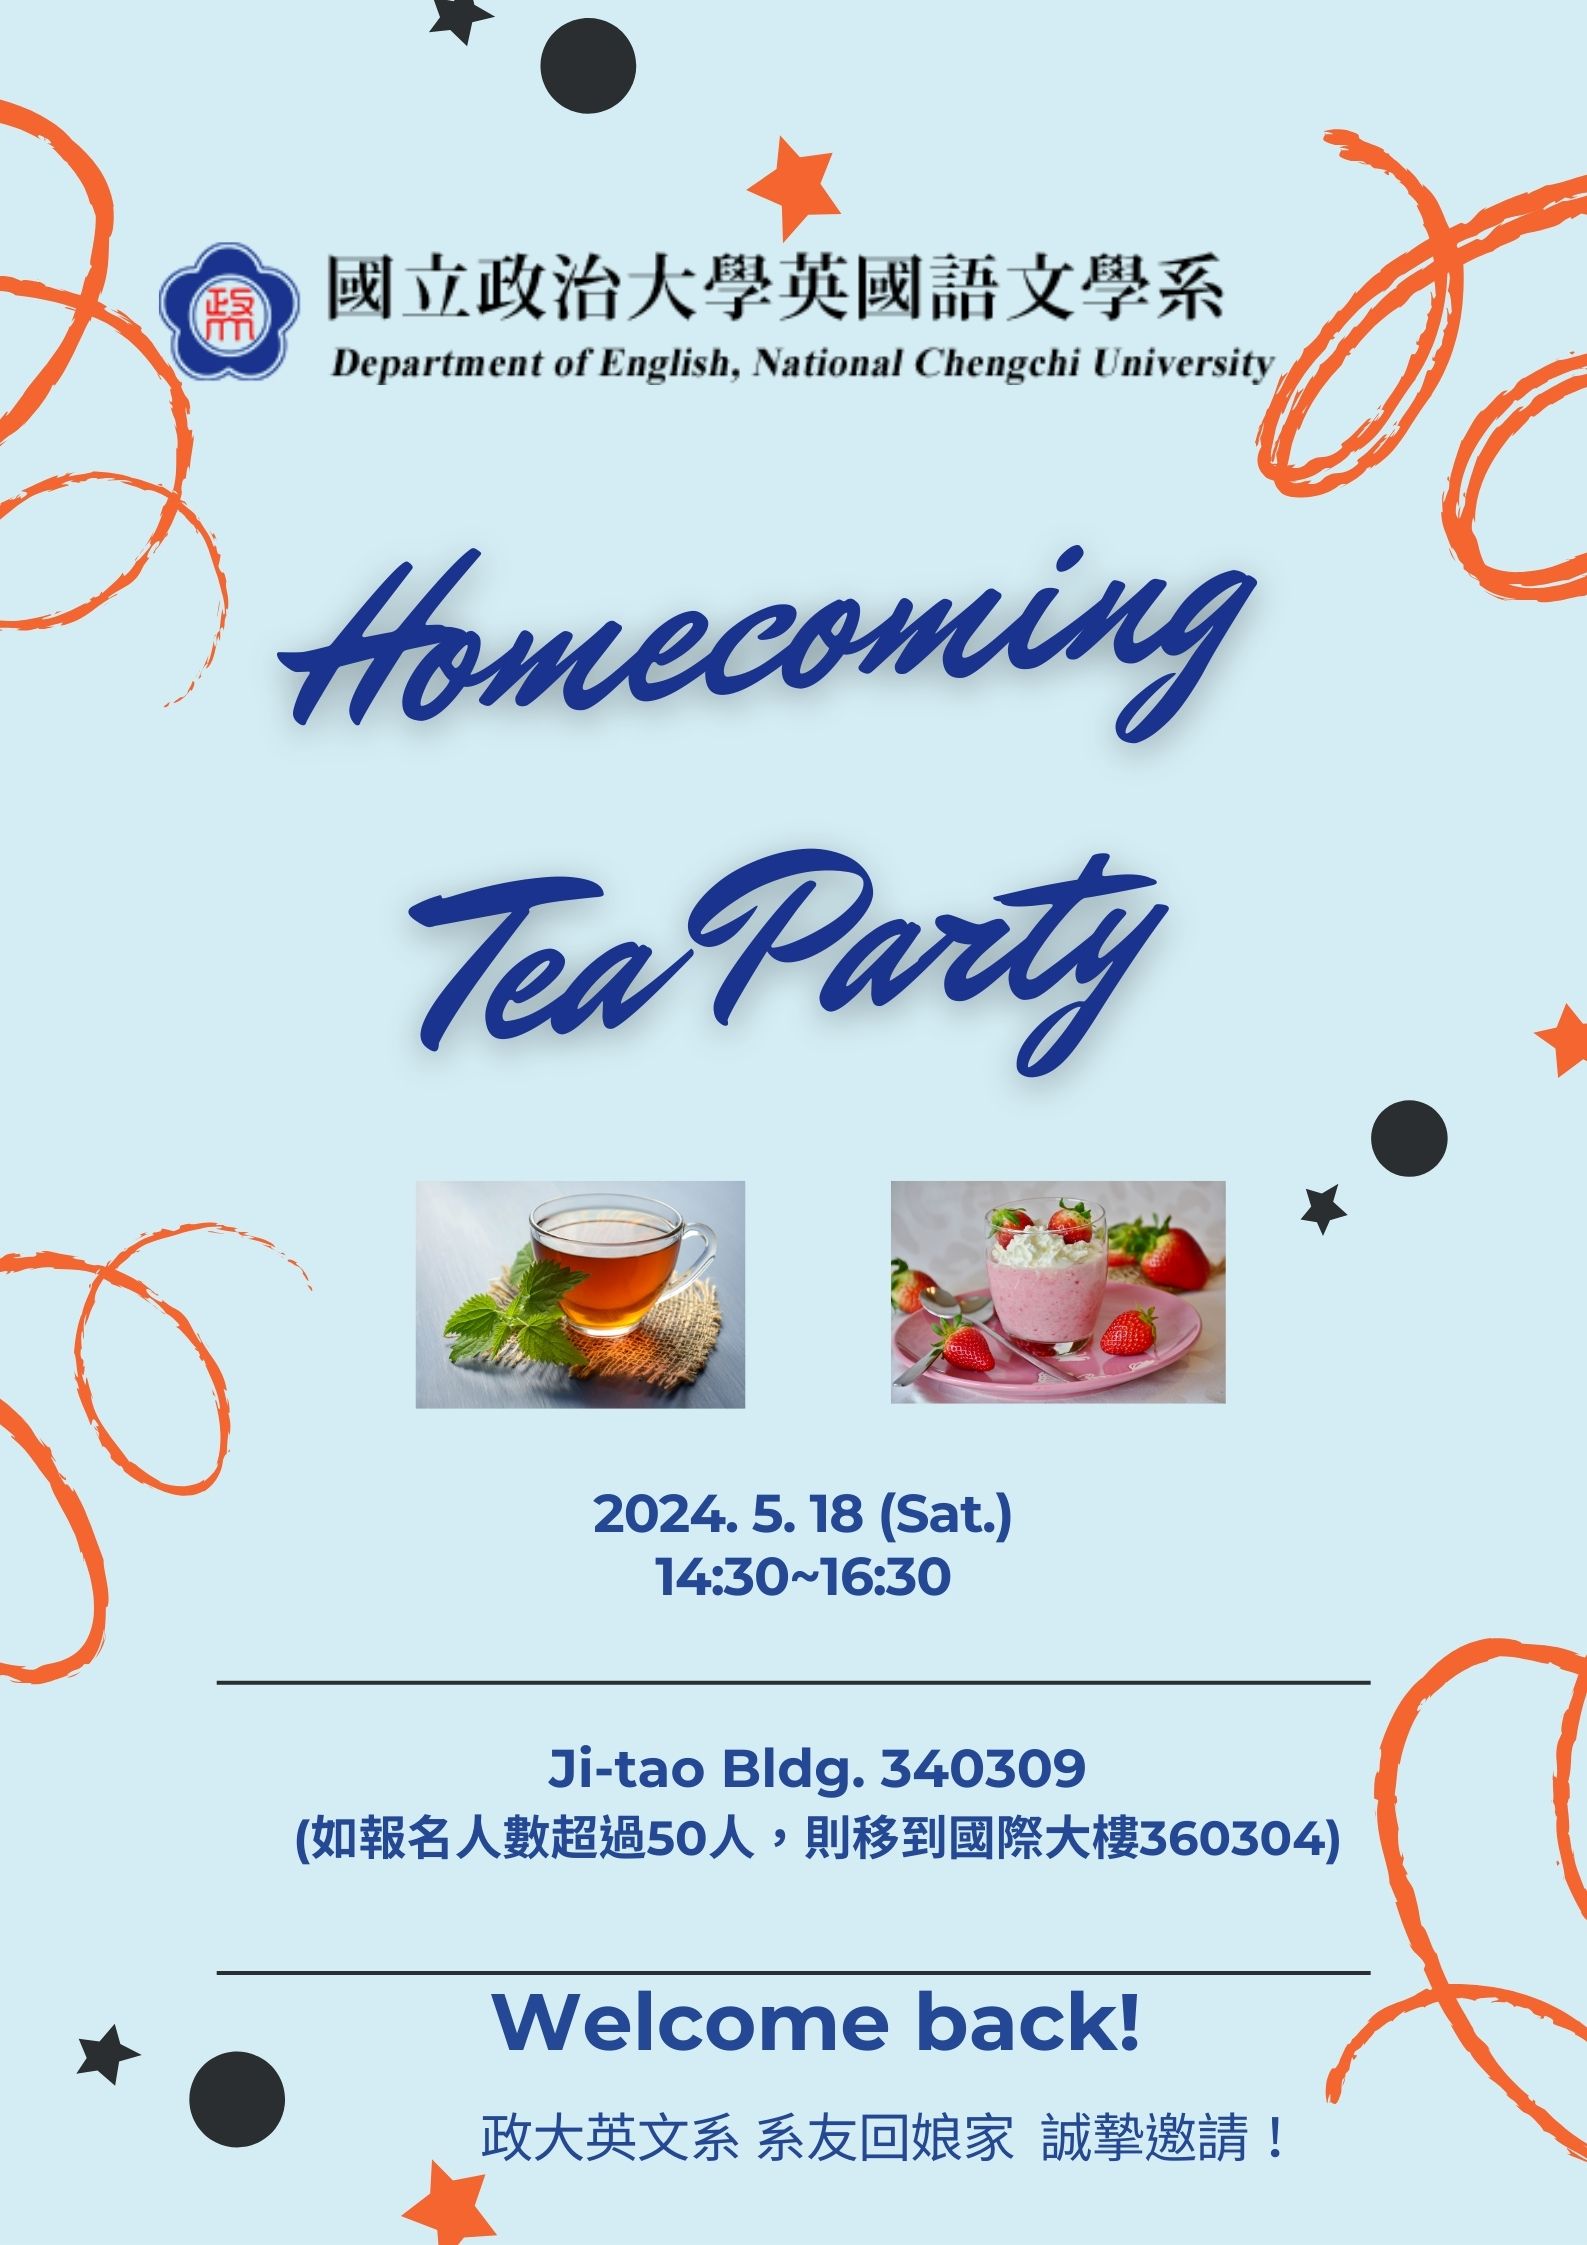 English Alumni Tea Party (2024.5.18)-registration extended to May 10